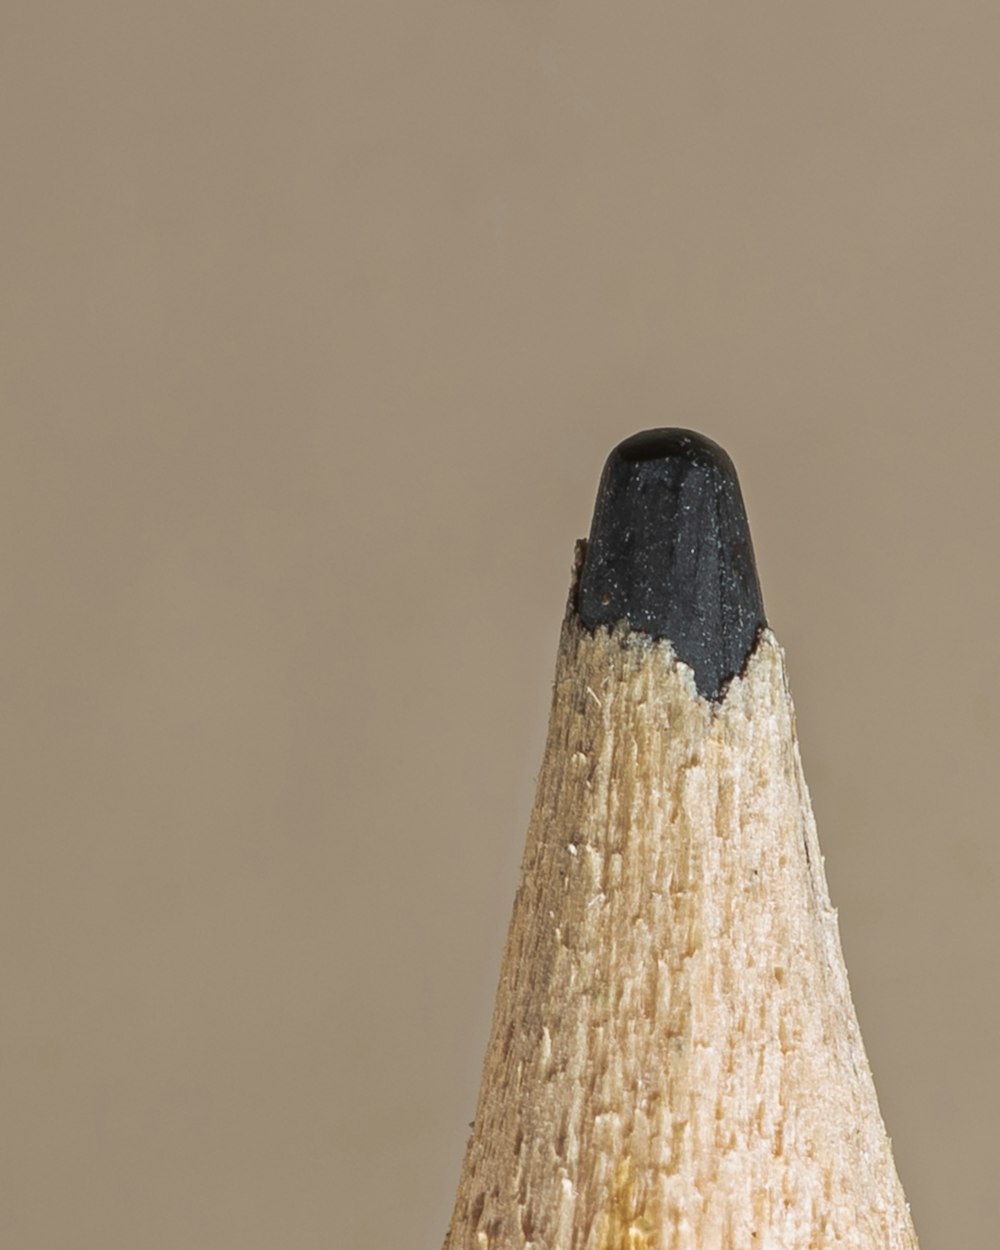 a close up of a pencil with a black tip